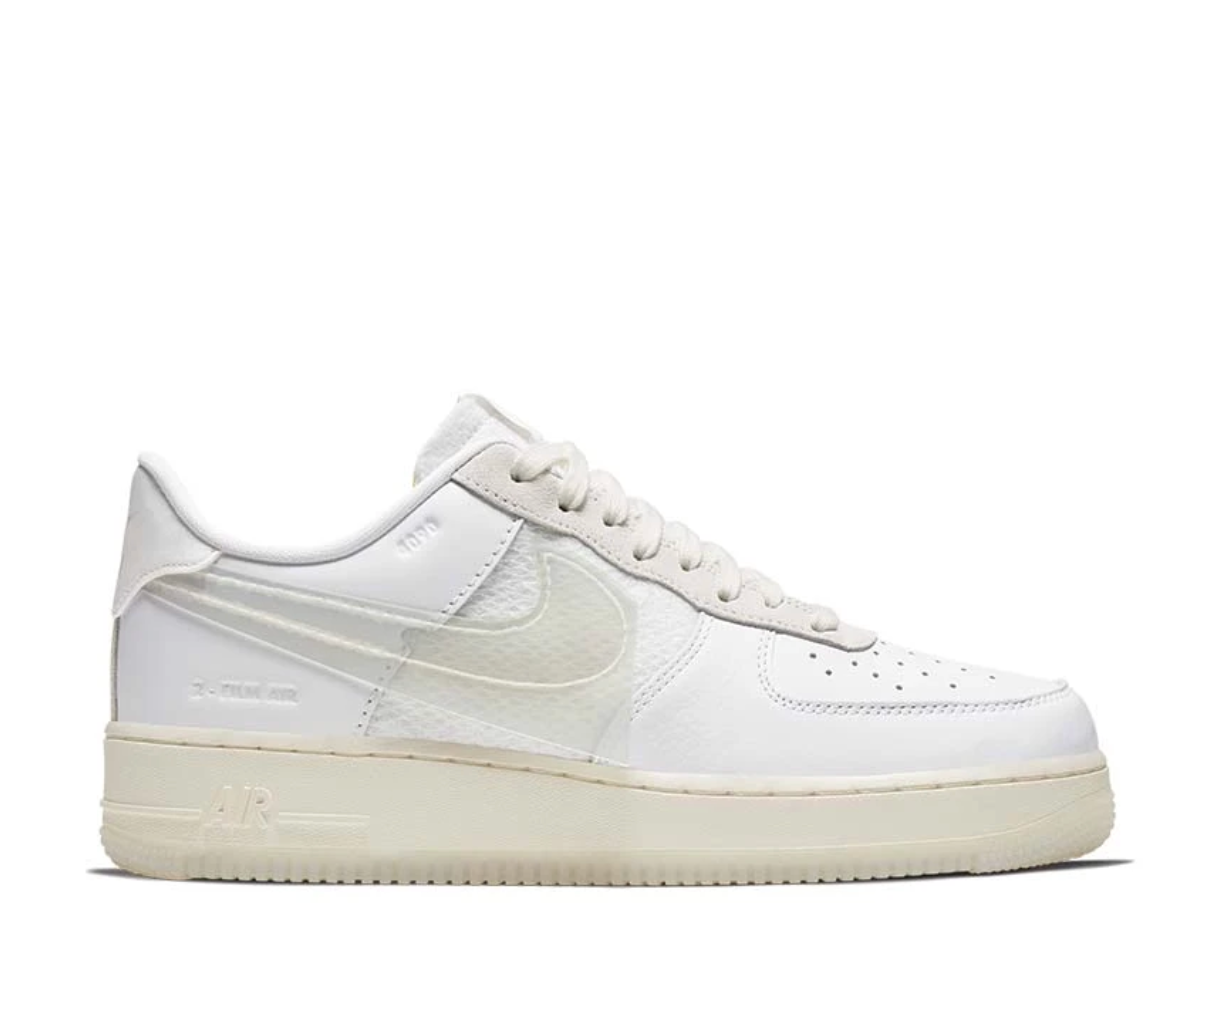 NIKE AIR FORCE 1 LV8 DNA - Foottower